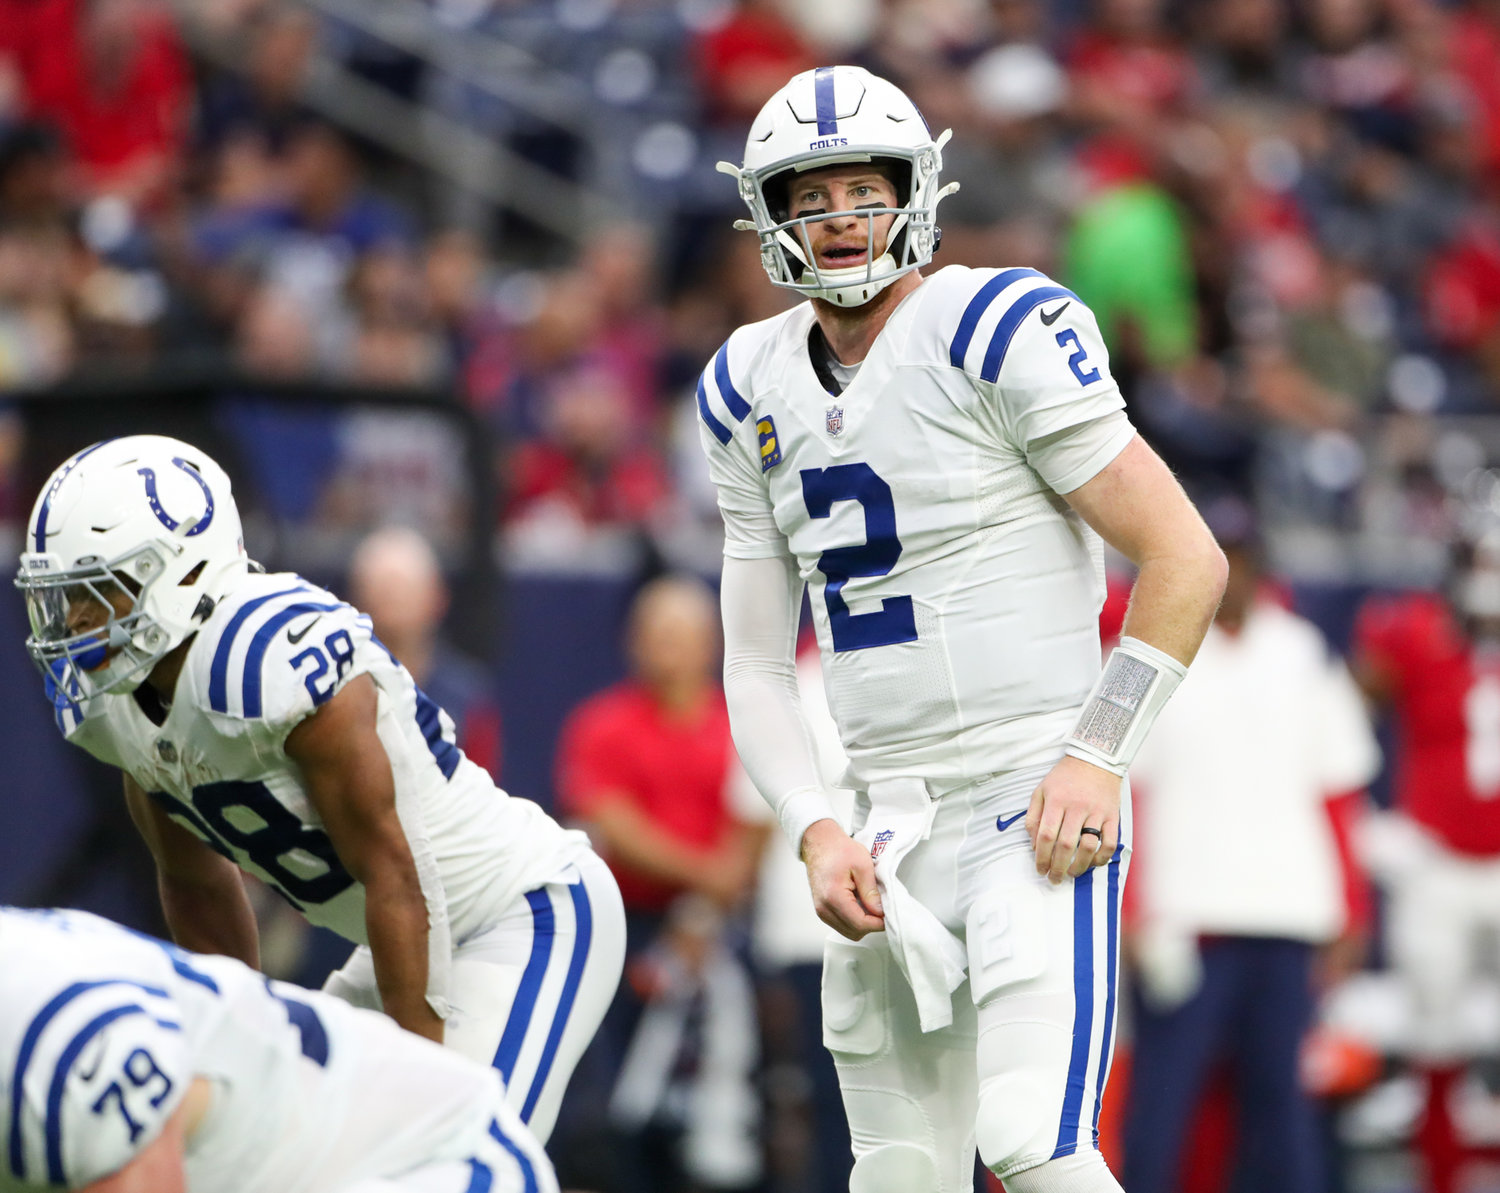 Indianapolis Colts quarterback Carson Wentz (2) during an NFL game between the Texans and the Colts on December 5, 2021 in Houston, Texas.